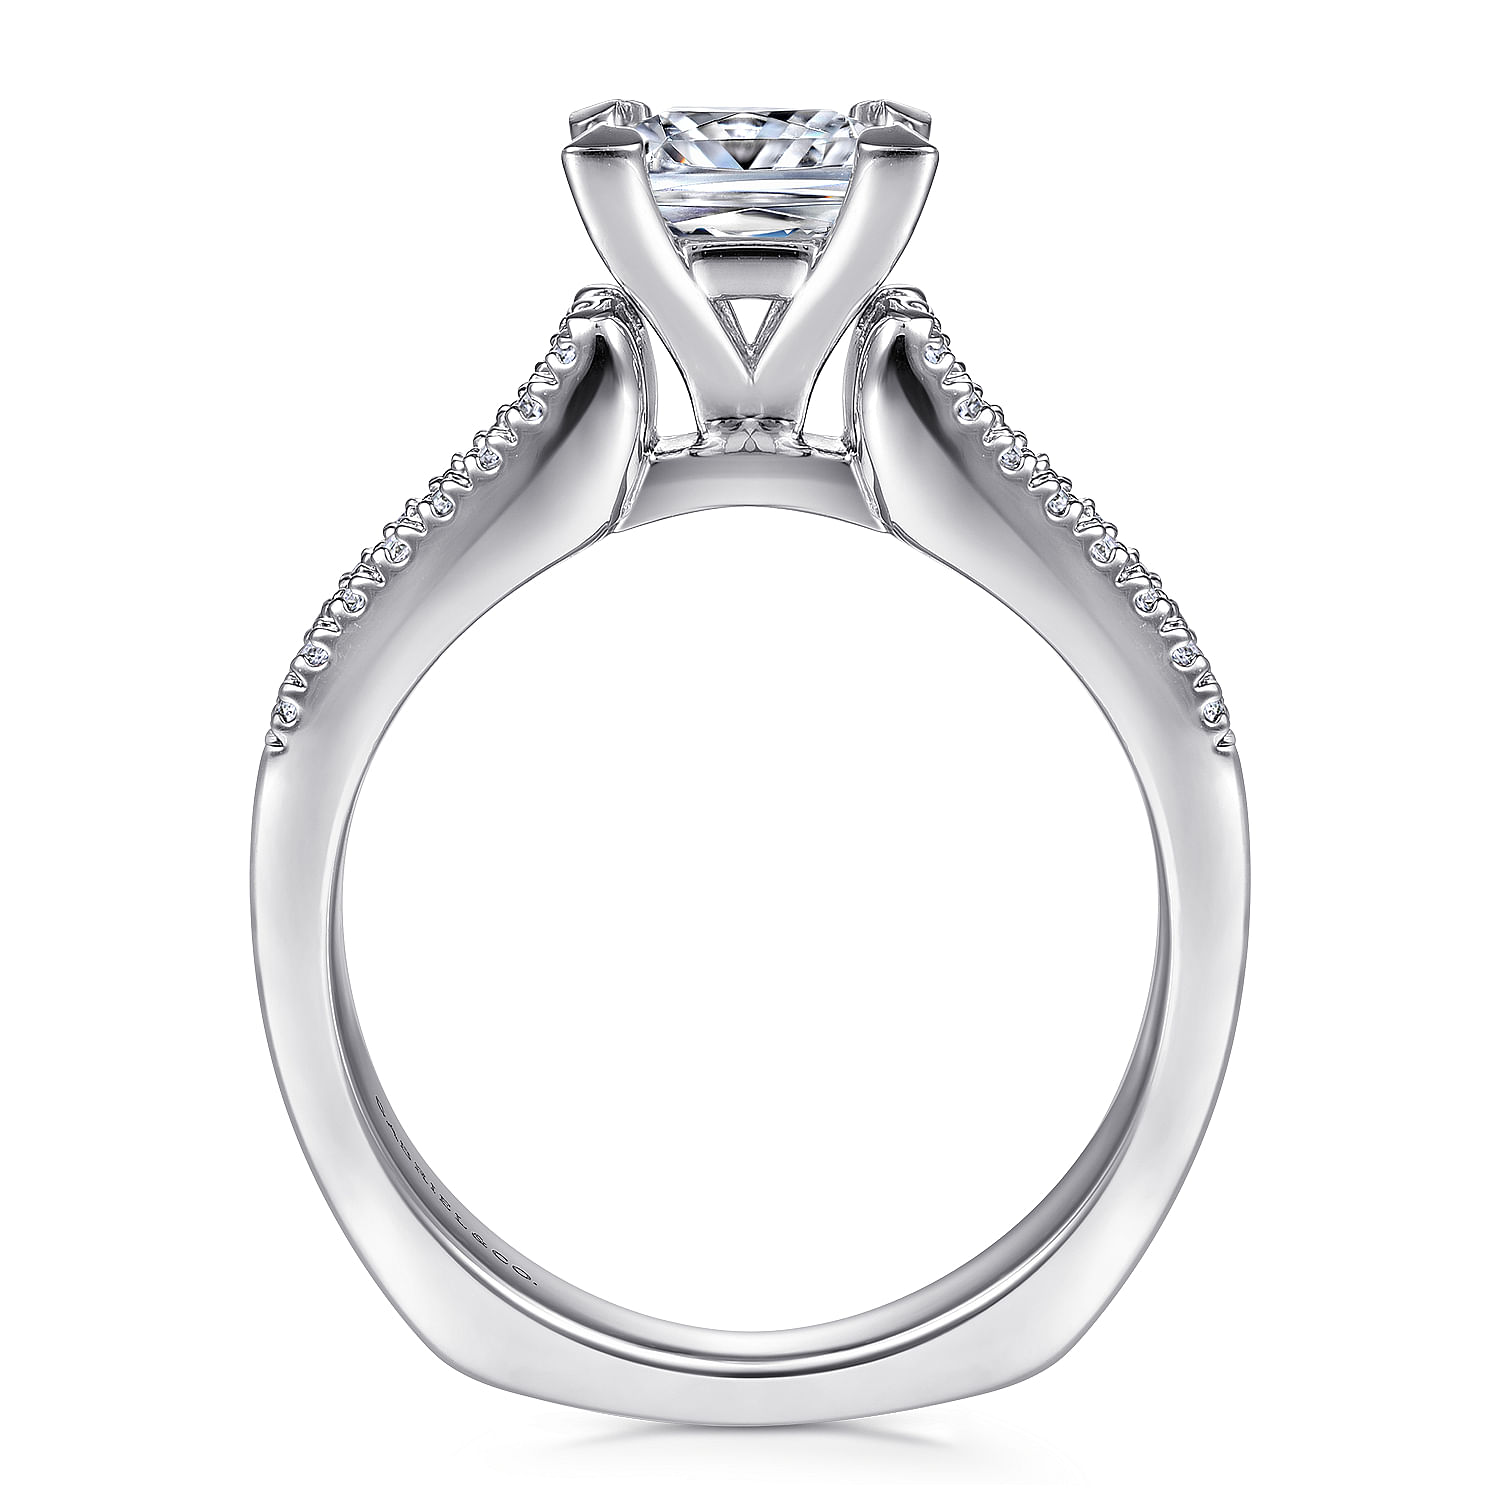 Channing - 14K White Gold Wide Band Princess Cut Diamond Channel Set Engagement Ring - 0.5 ct - Shot 2